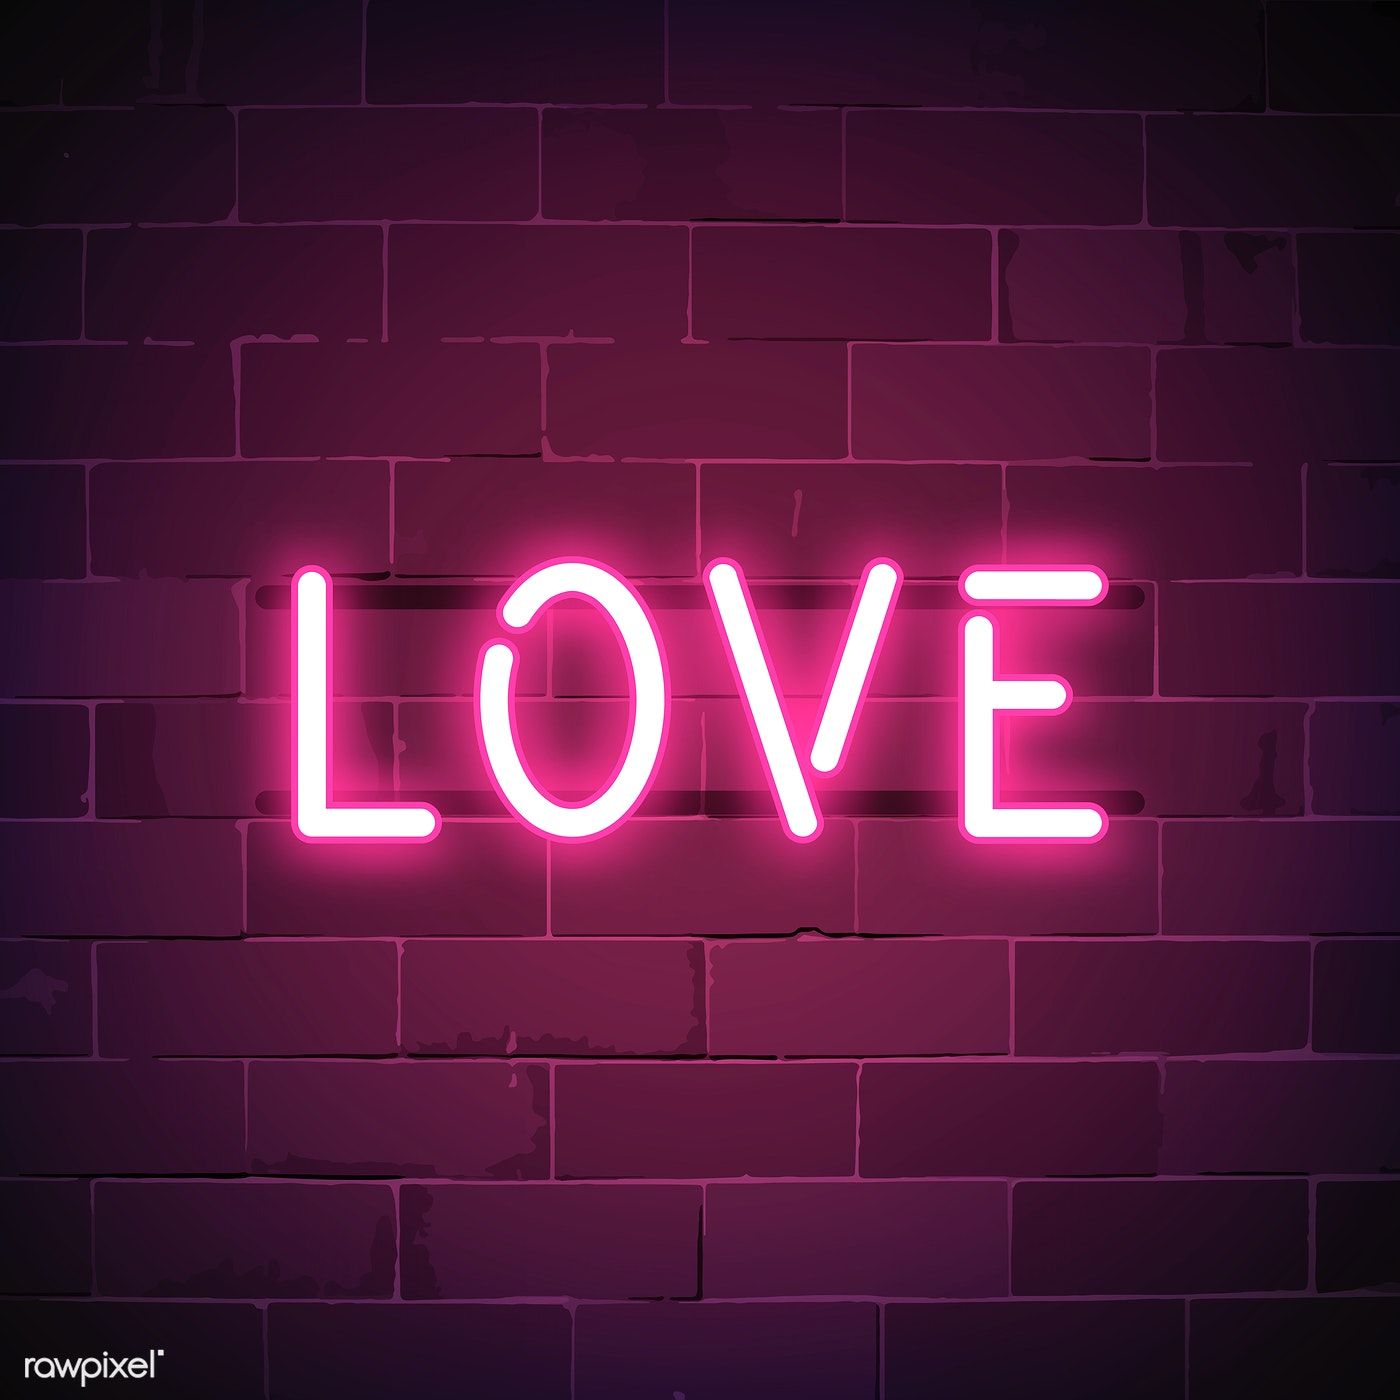 Love is all around neon sign vector. free image / NingZk V. Neon signs, Pink neon sign, Neon wallpaper